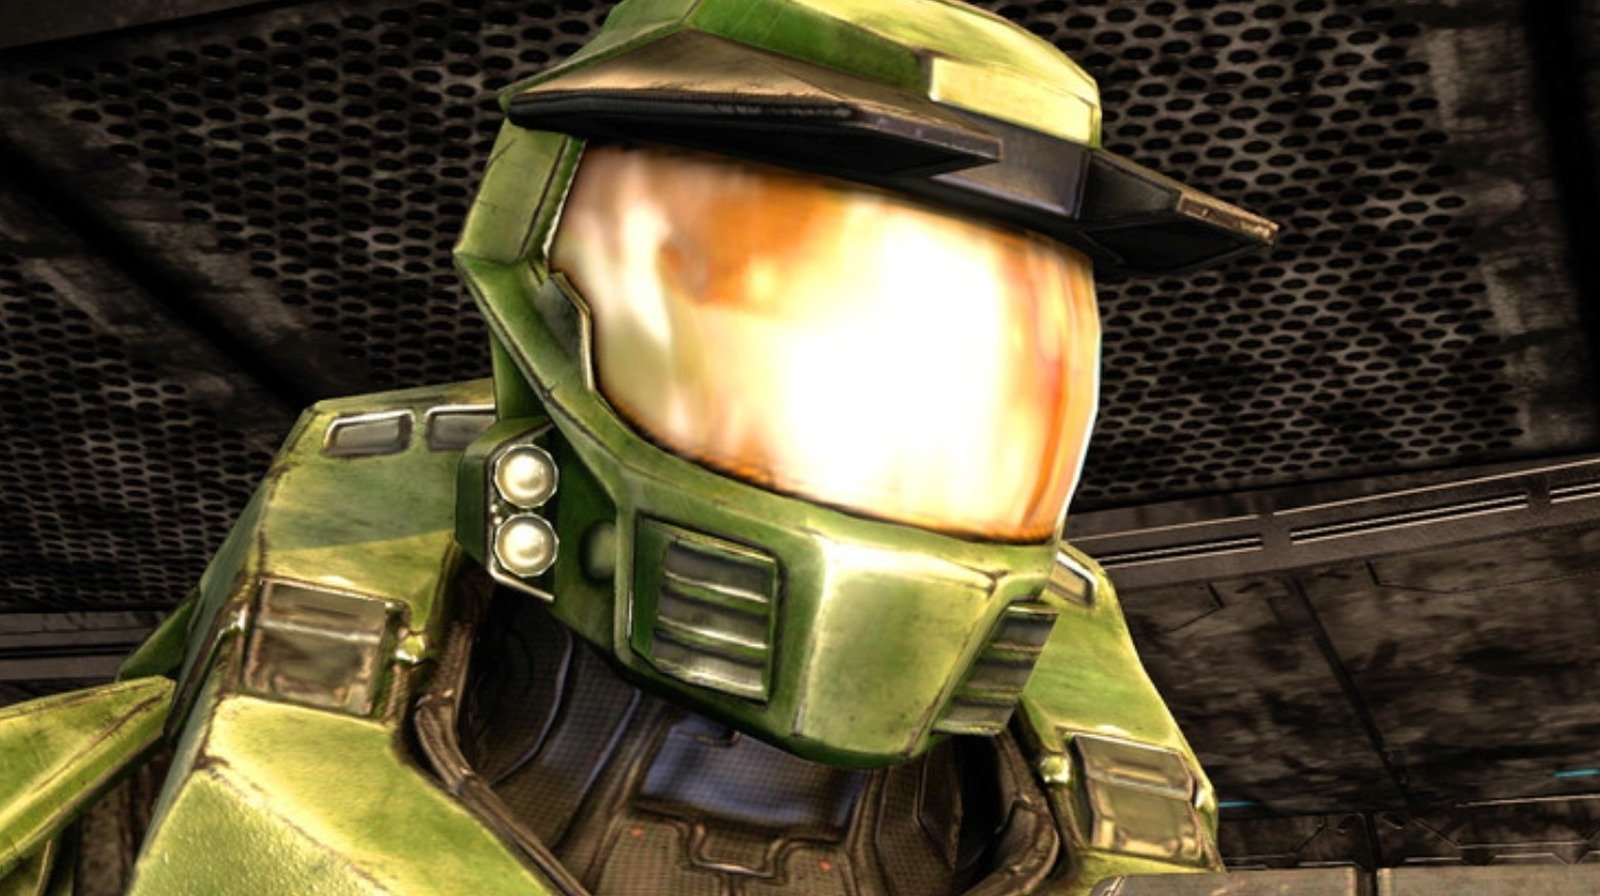 These Deleted Halo Weapons Could Have Changed The Game - SVG